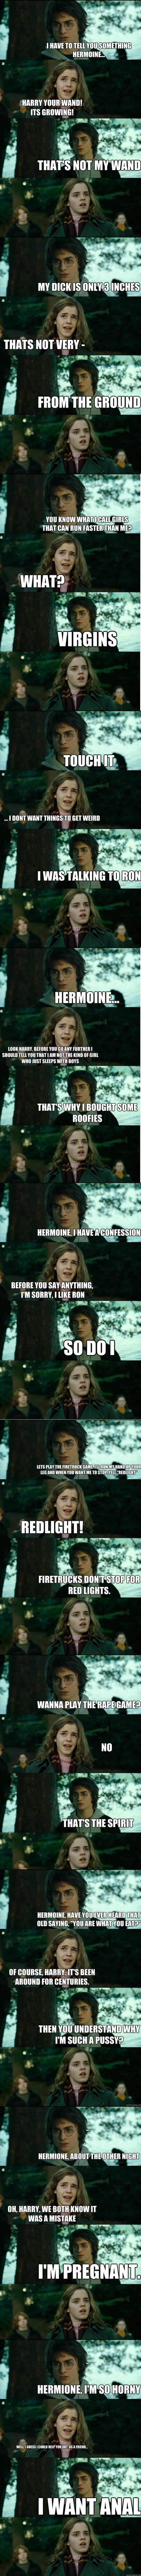 horny harry potter and hermione granger meme compilation